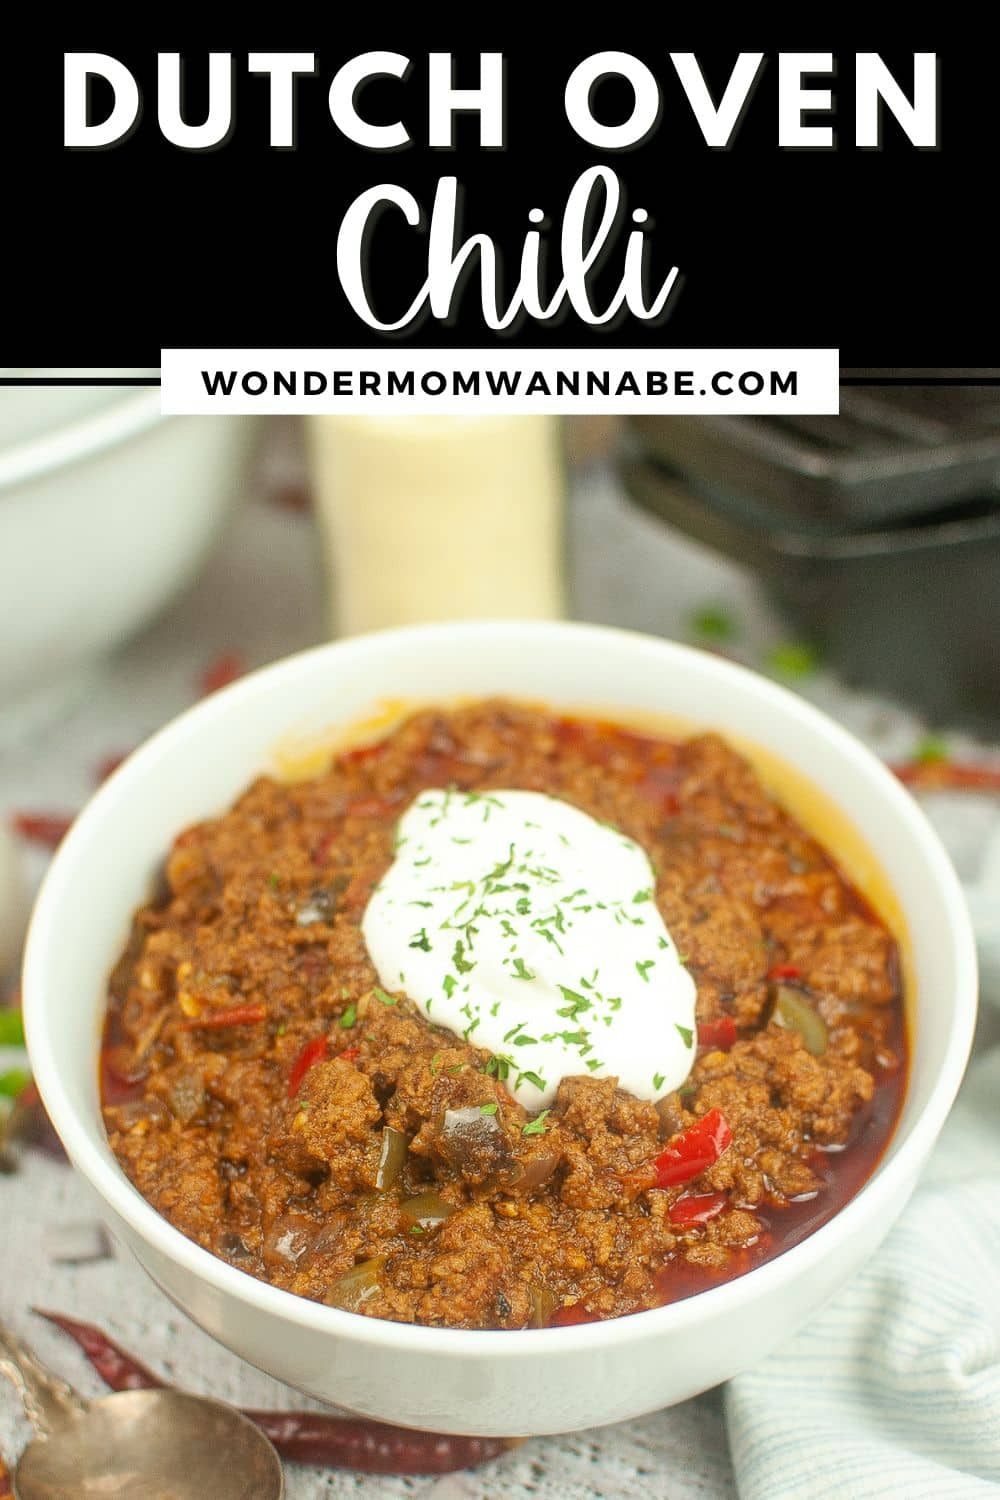 Dutch oven chili topped with sour cream in a bowl.